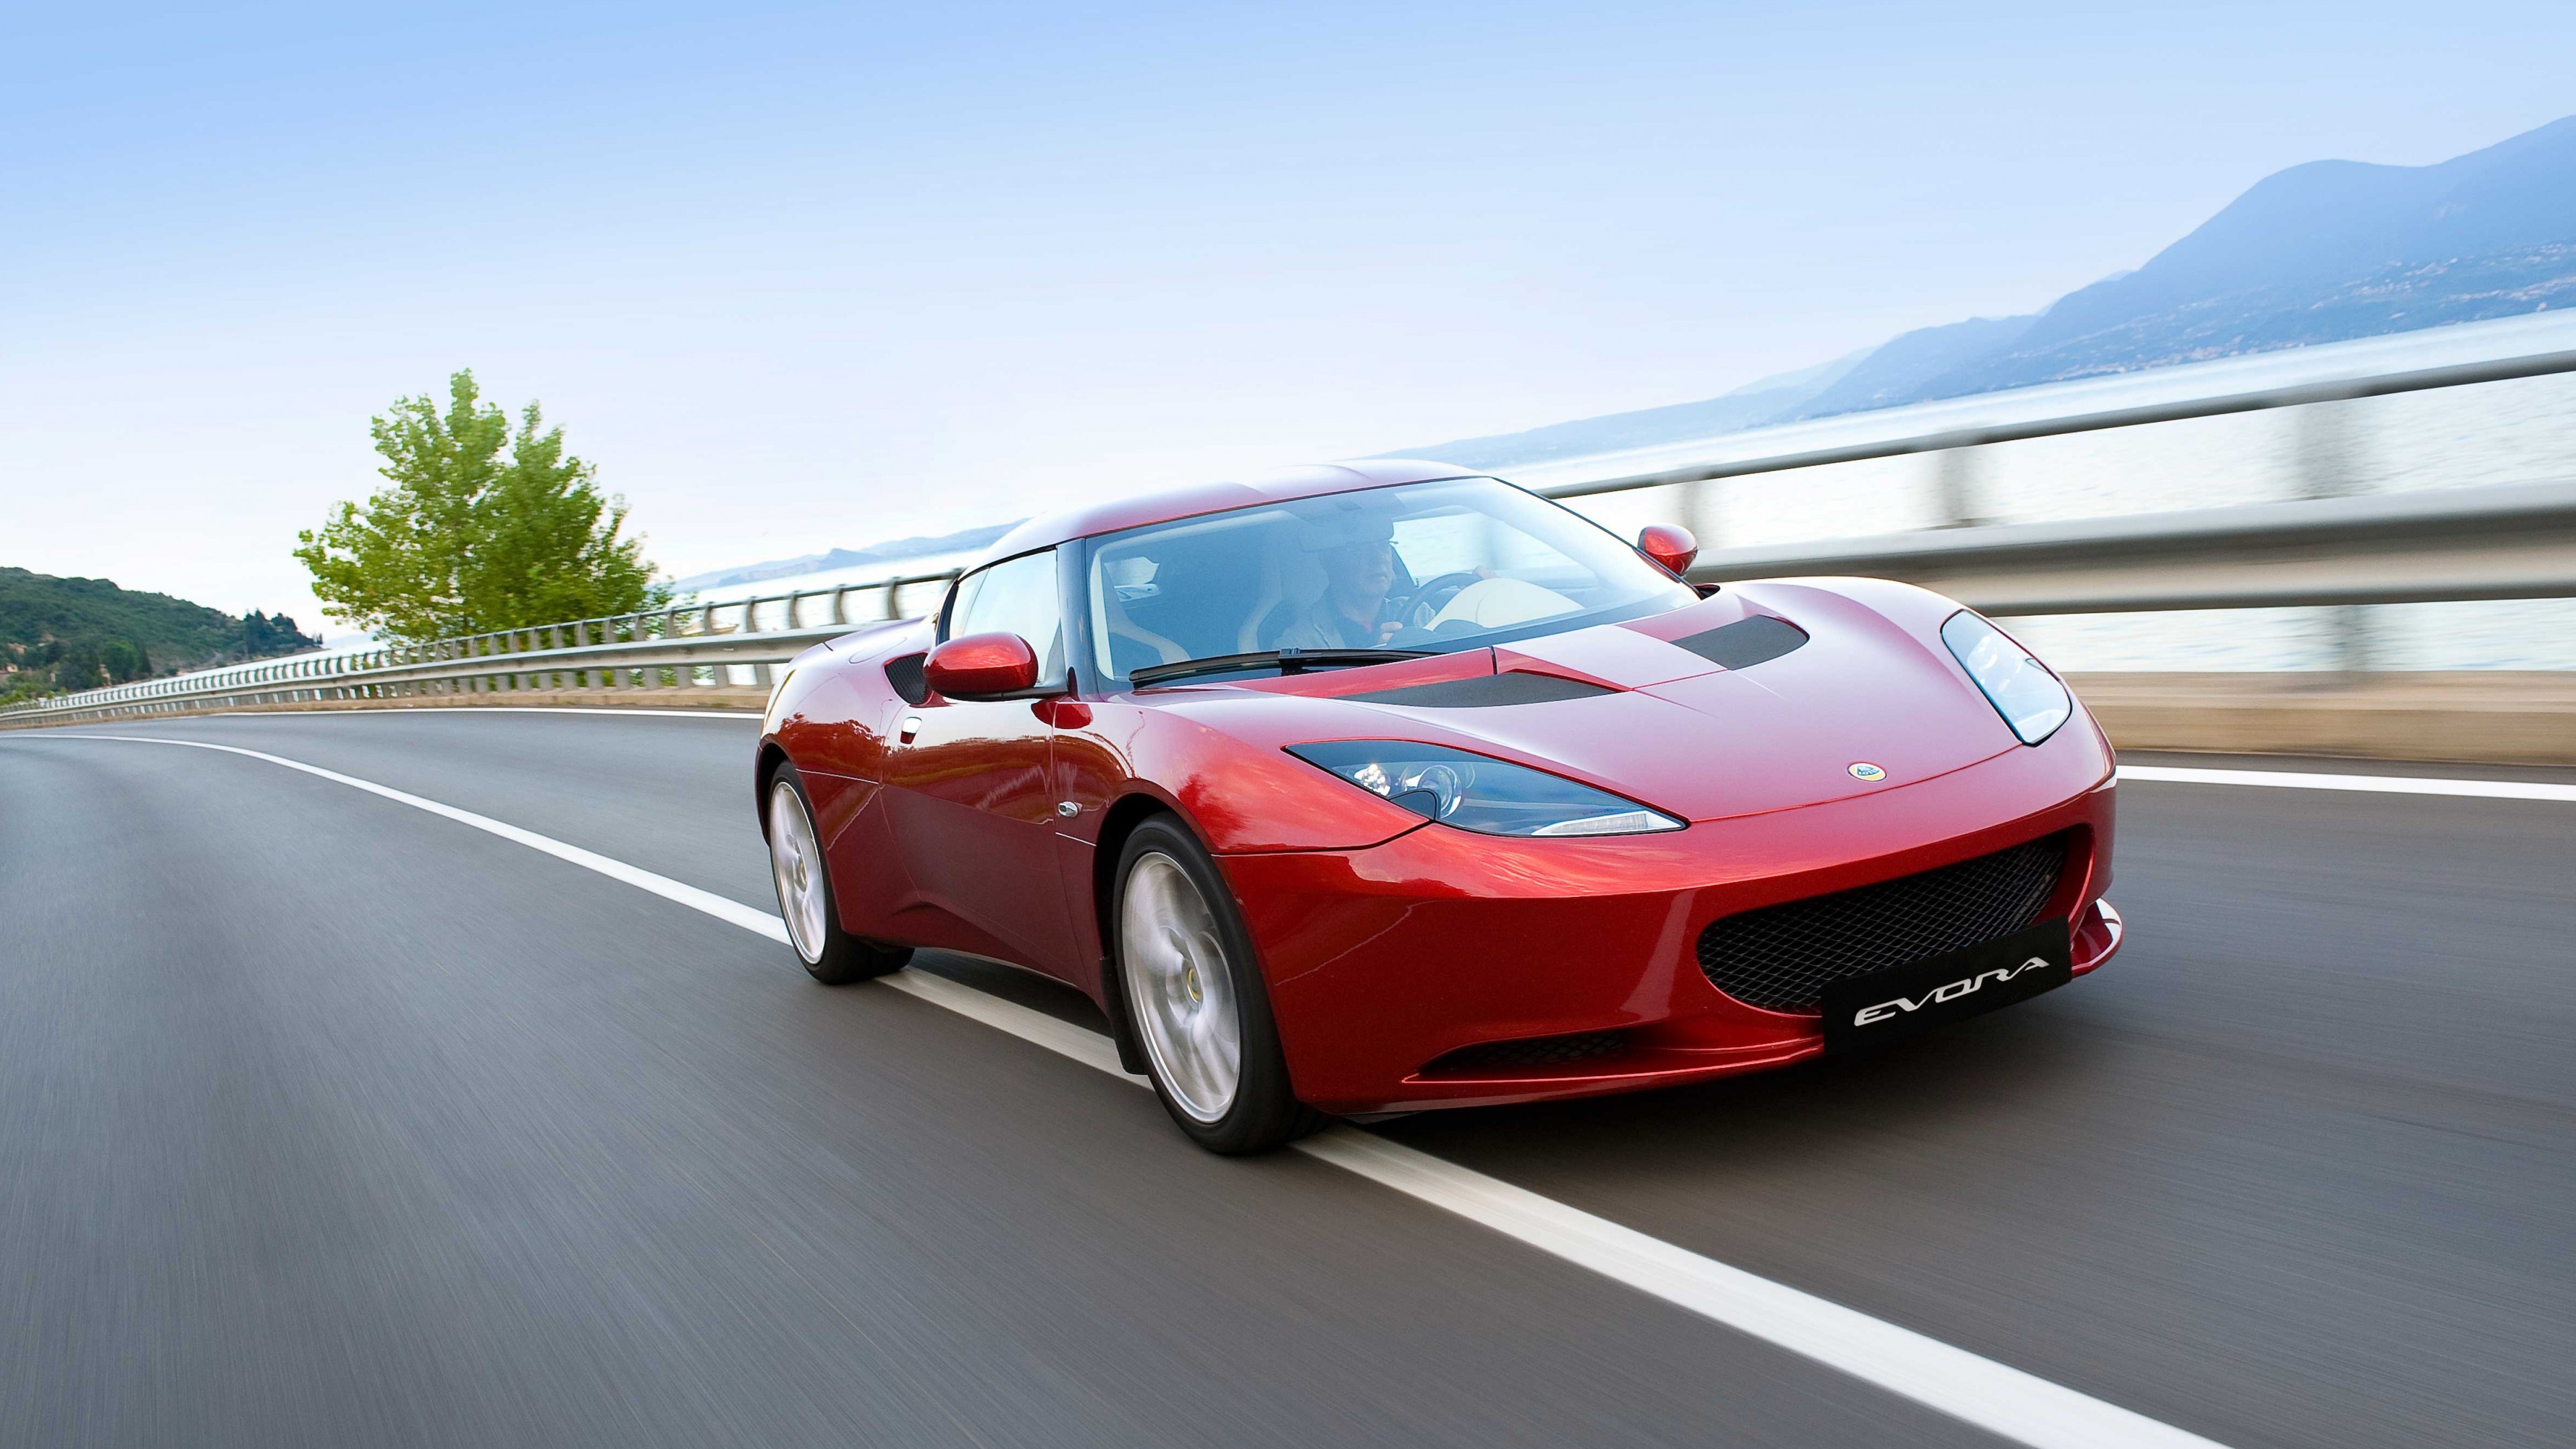 Lotus Evora, Supercar luxury, Red sports car, Unparalleled driving experience, 3840x2160 4K Desktop